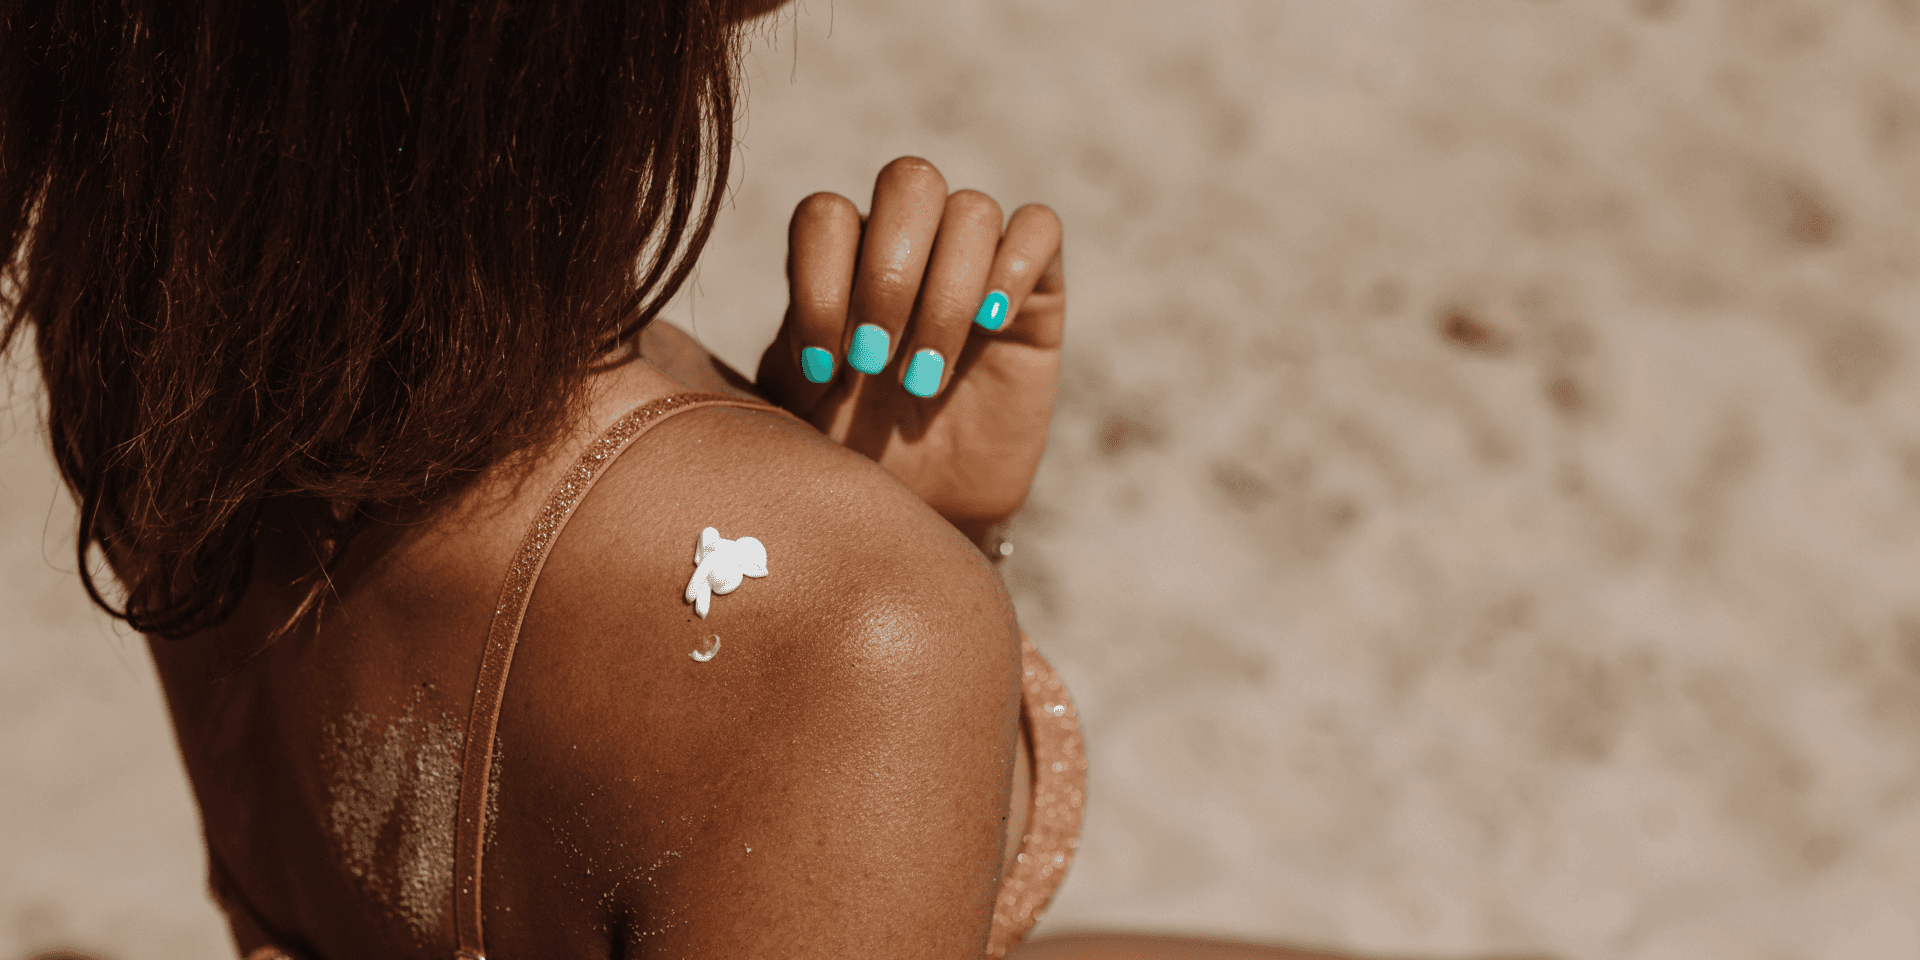 There is a woman with golden brown skin. She has her back to us and there is vegan sunscreen on her shoulder. Her hand is raised to her shoulder as if she is about to wipe the suncream in. Her nails are painted bright blue and you can see that she is on a beach because of the sand in the backgroun.